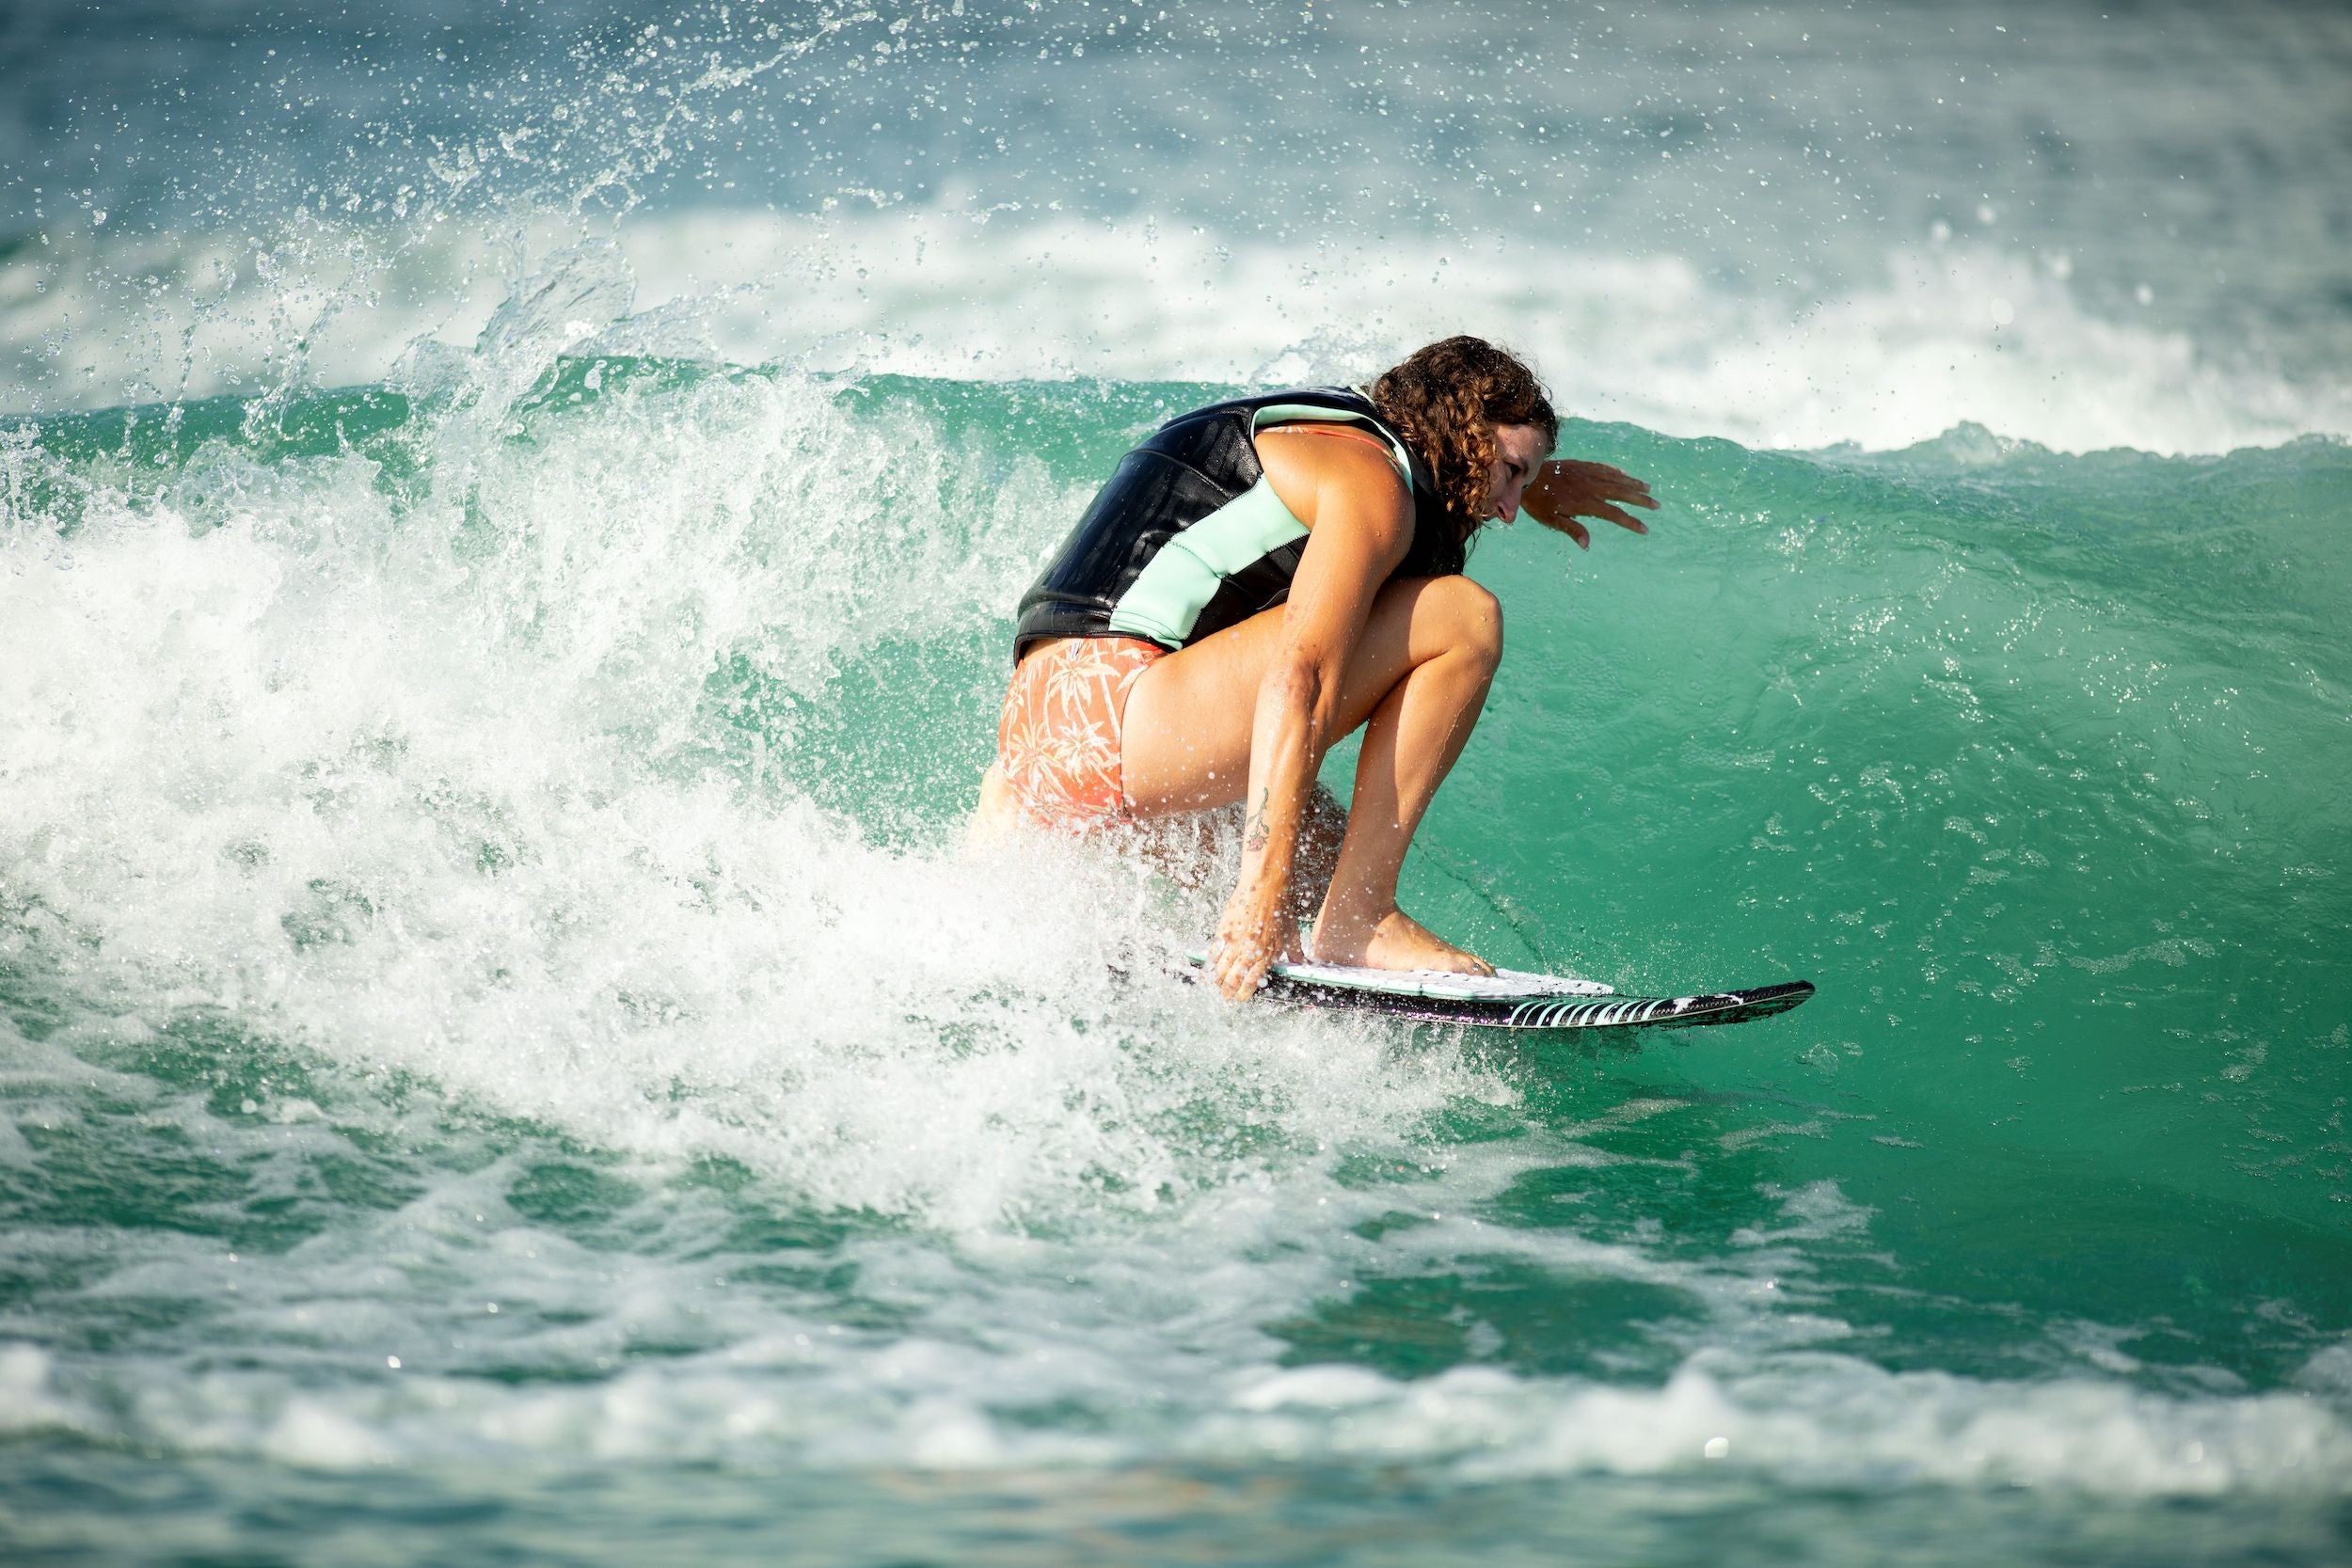 A quick-reacting surfer riding a wave on a Ronix 2024 Women's Sea Captain wakesurf board.